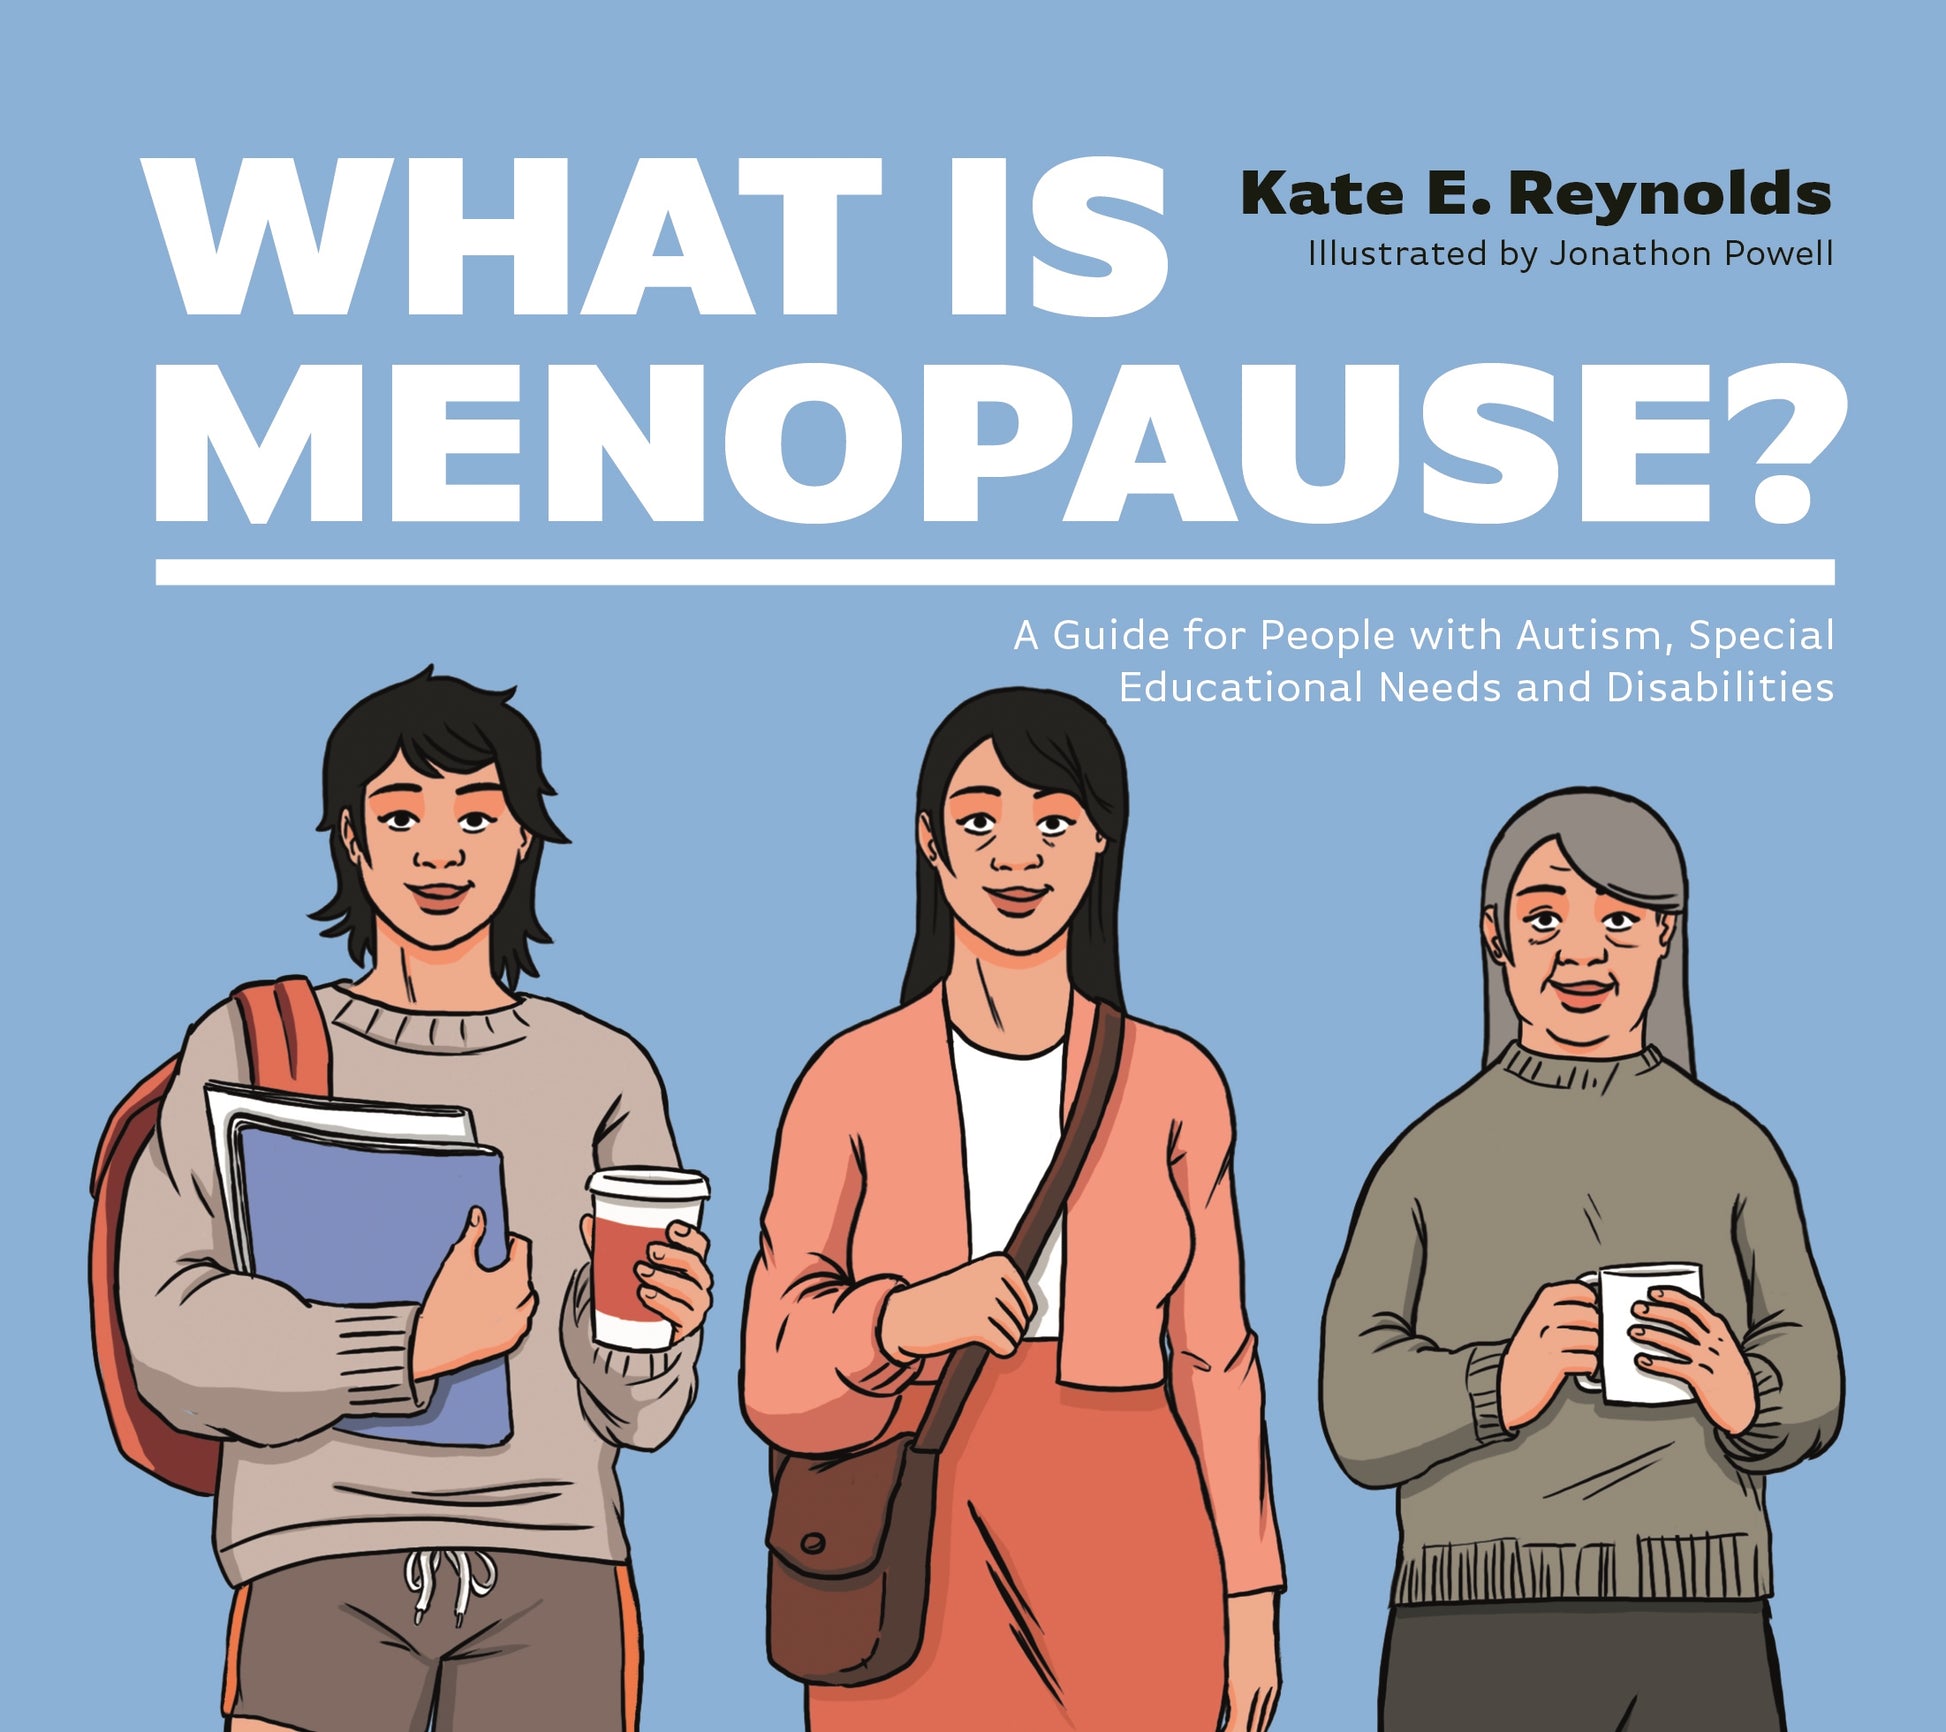 What Is Menopause? by Jonathon Powell, Kate E. Reynolds